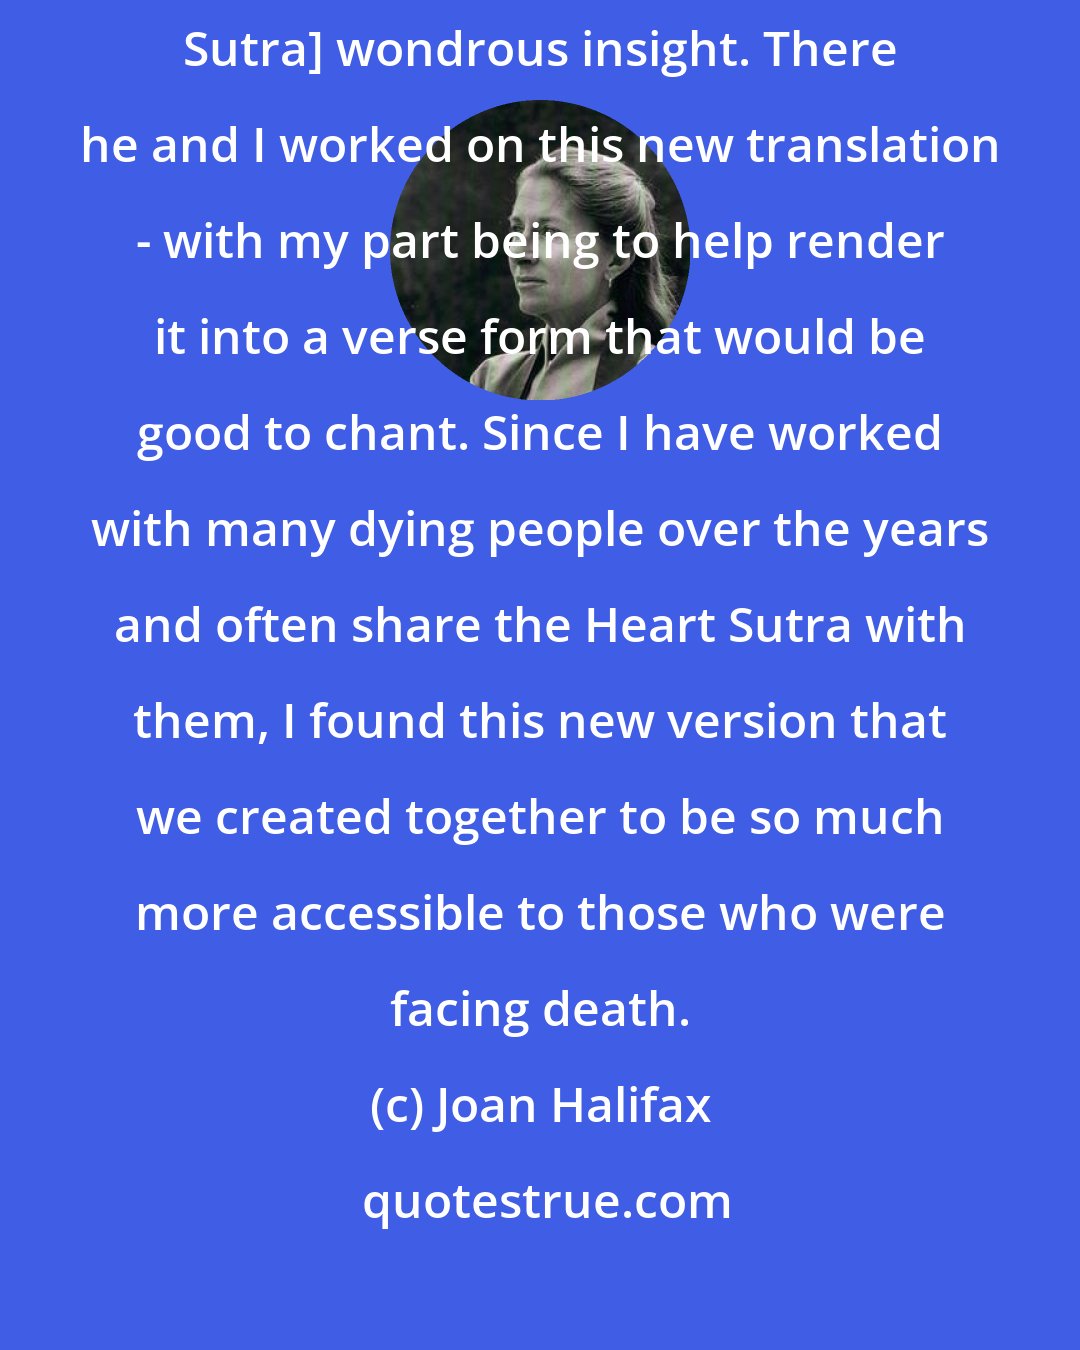 Joan Halifax: Kaz came to Switzerland where I was teaching to share with me [Heart Sutra] wondrous insight. There he and I worked on this new translation - with my part being to help render it into a verse form that would be good to chant. Since I have worked with many dying people over the years and often share the Heart Sutra with them, I found this new version that we created together to be so much more accessible to those who were facing death.